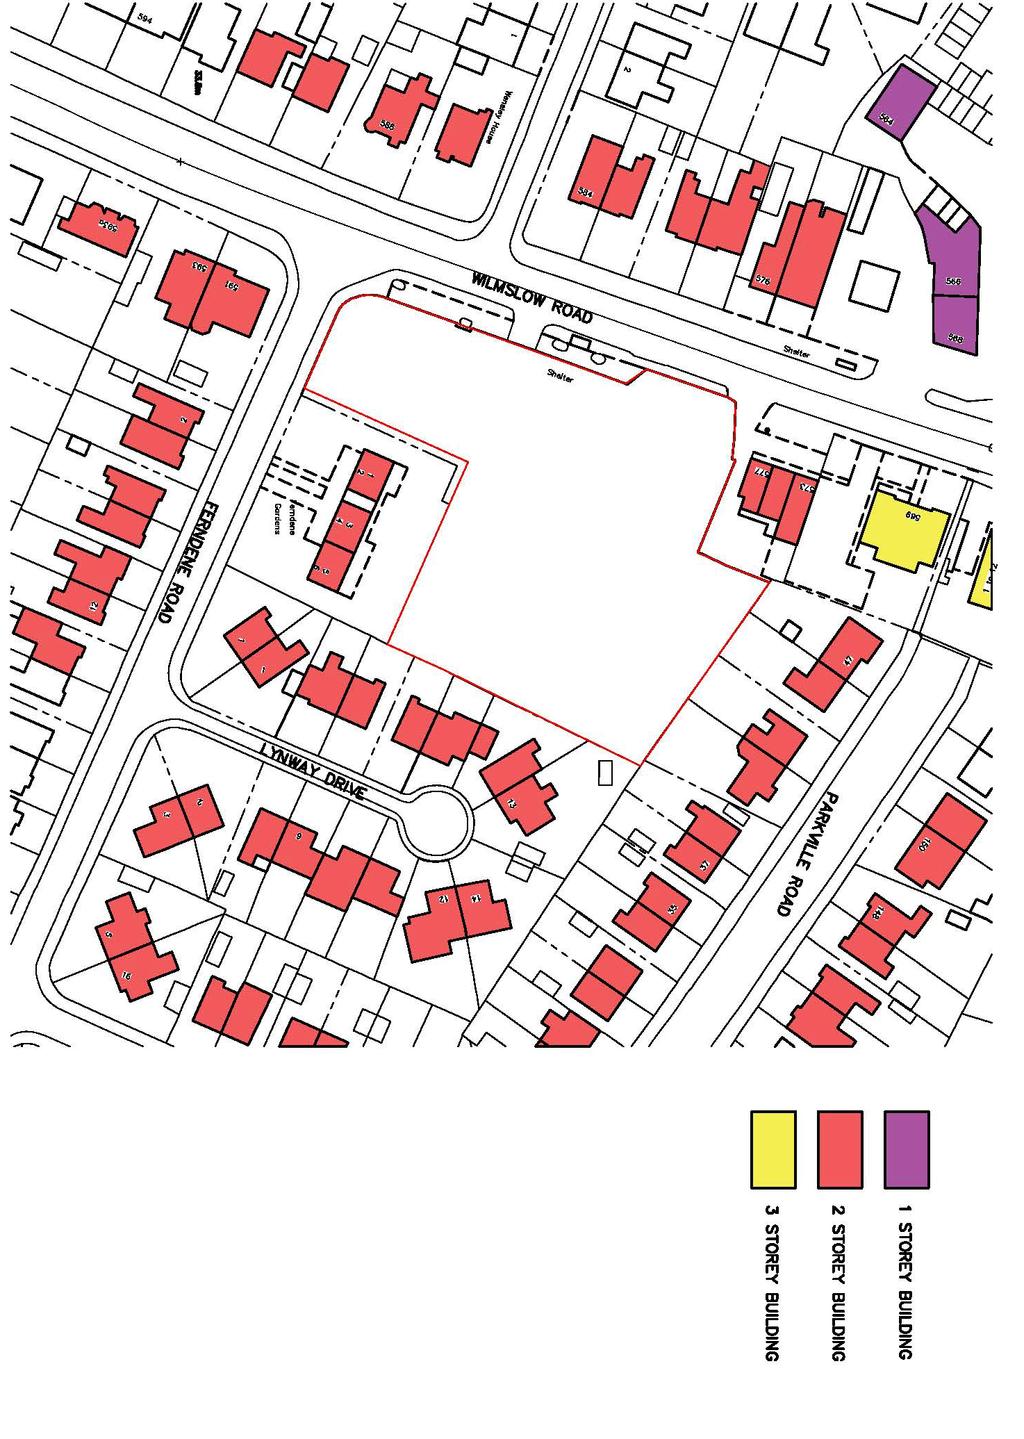 Evaluation Of Site Storey Heights SITE This plan